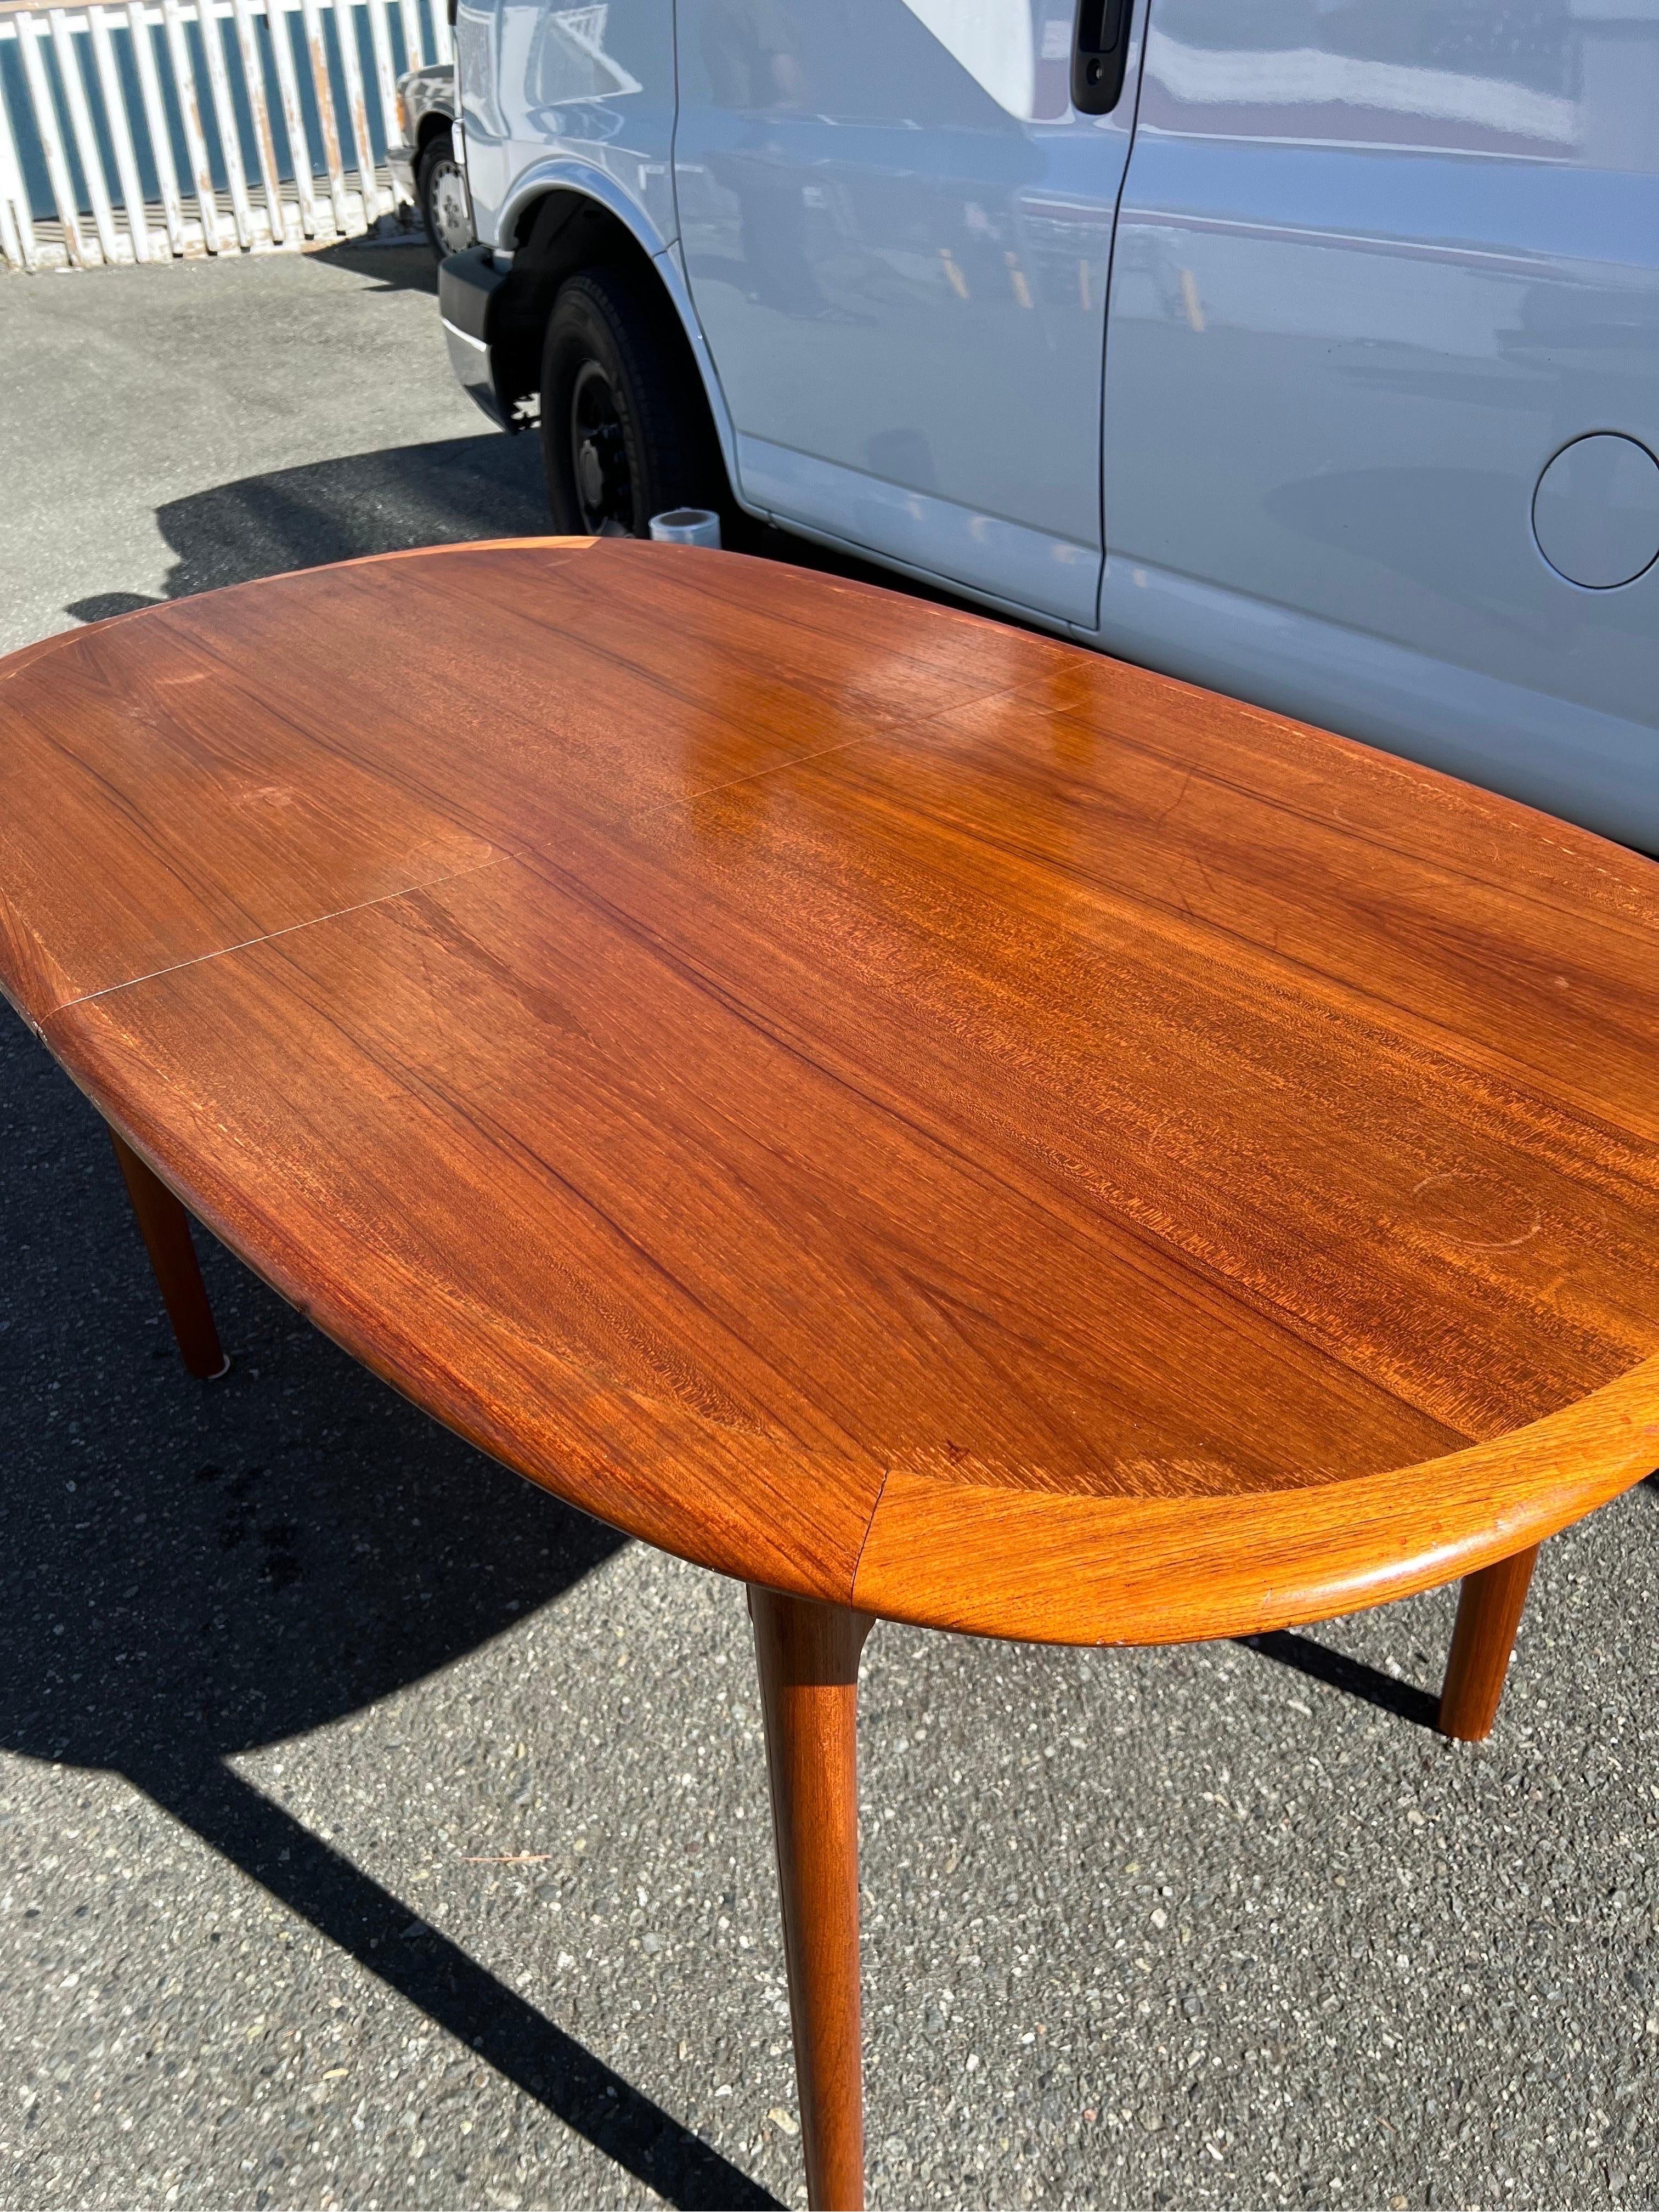 Vintage Danish Mid-Century Modern teak butterfly leaf dining table 
Dimensions. 66 W ; 29 H ; 36 D
Extended 91 1/2 W.